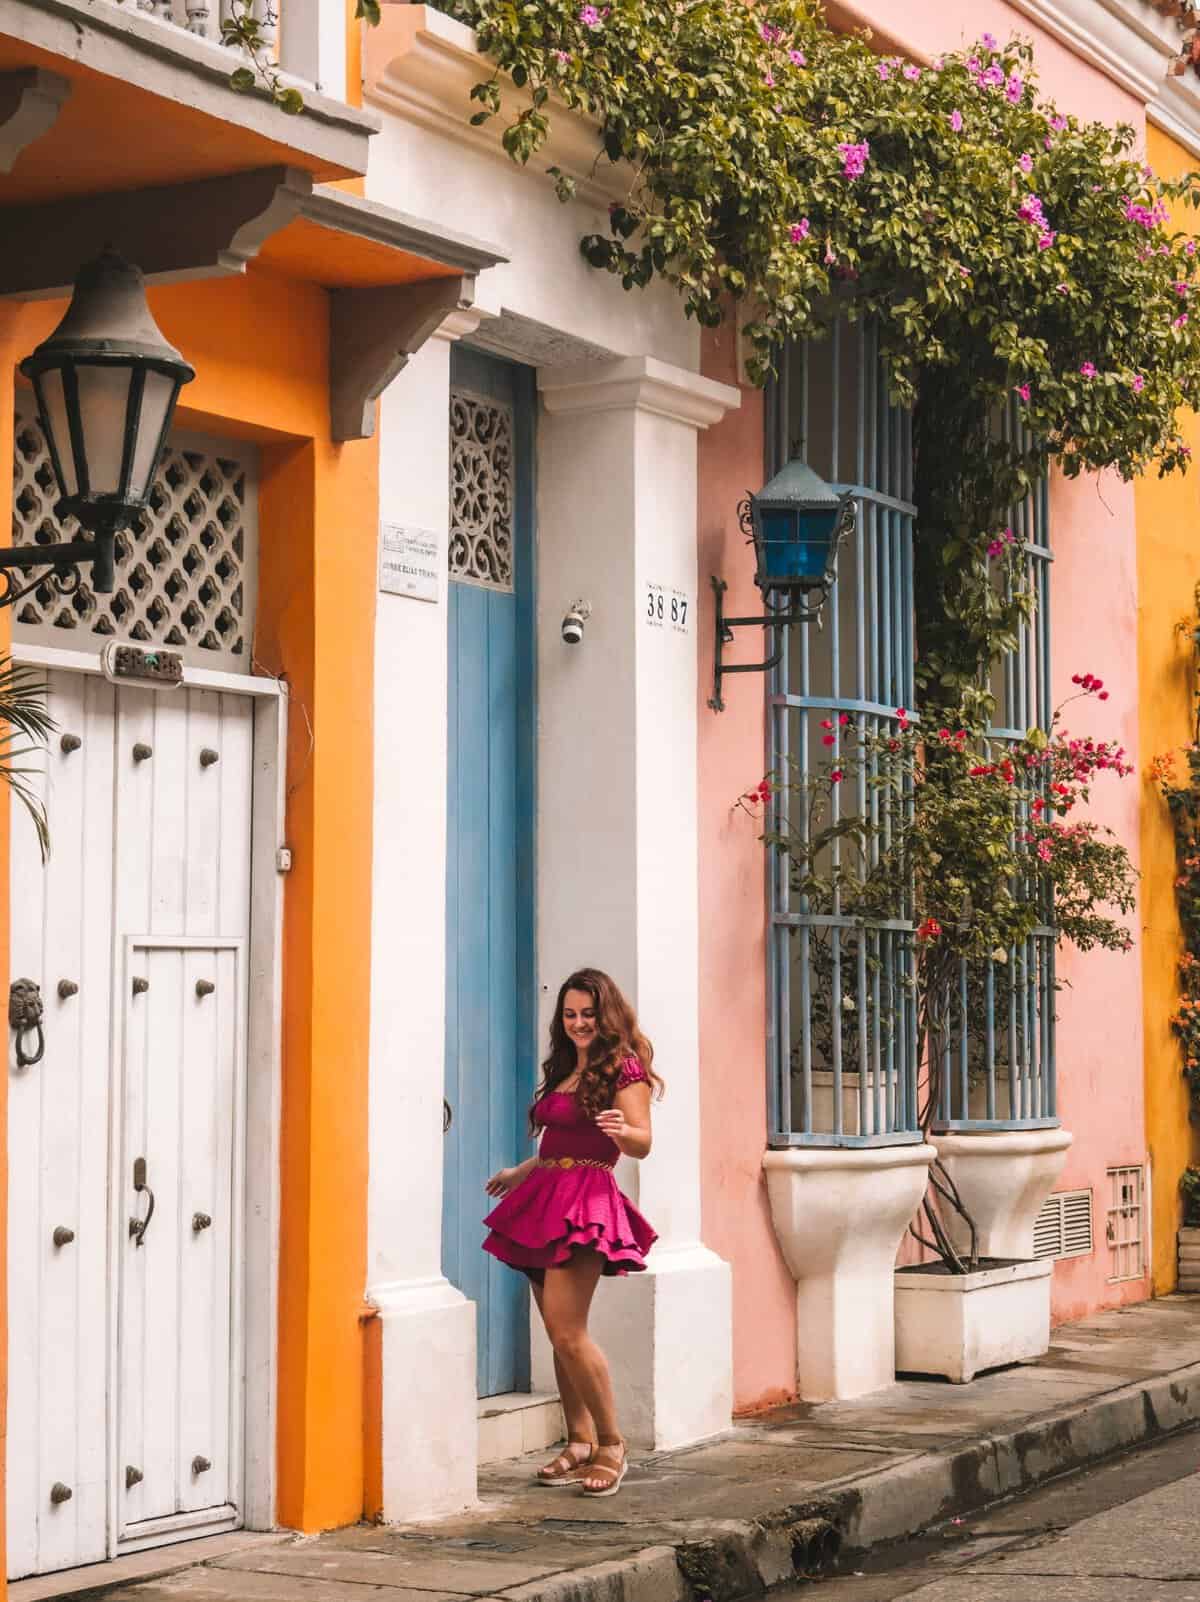 Me next to a blue door and pink flowers on the streets of Cartagena.